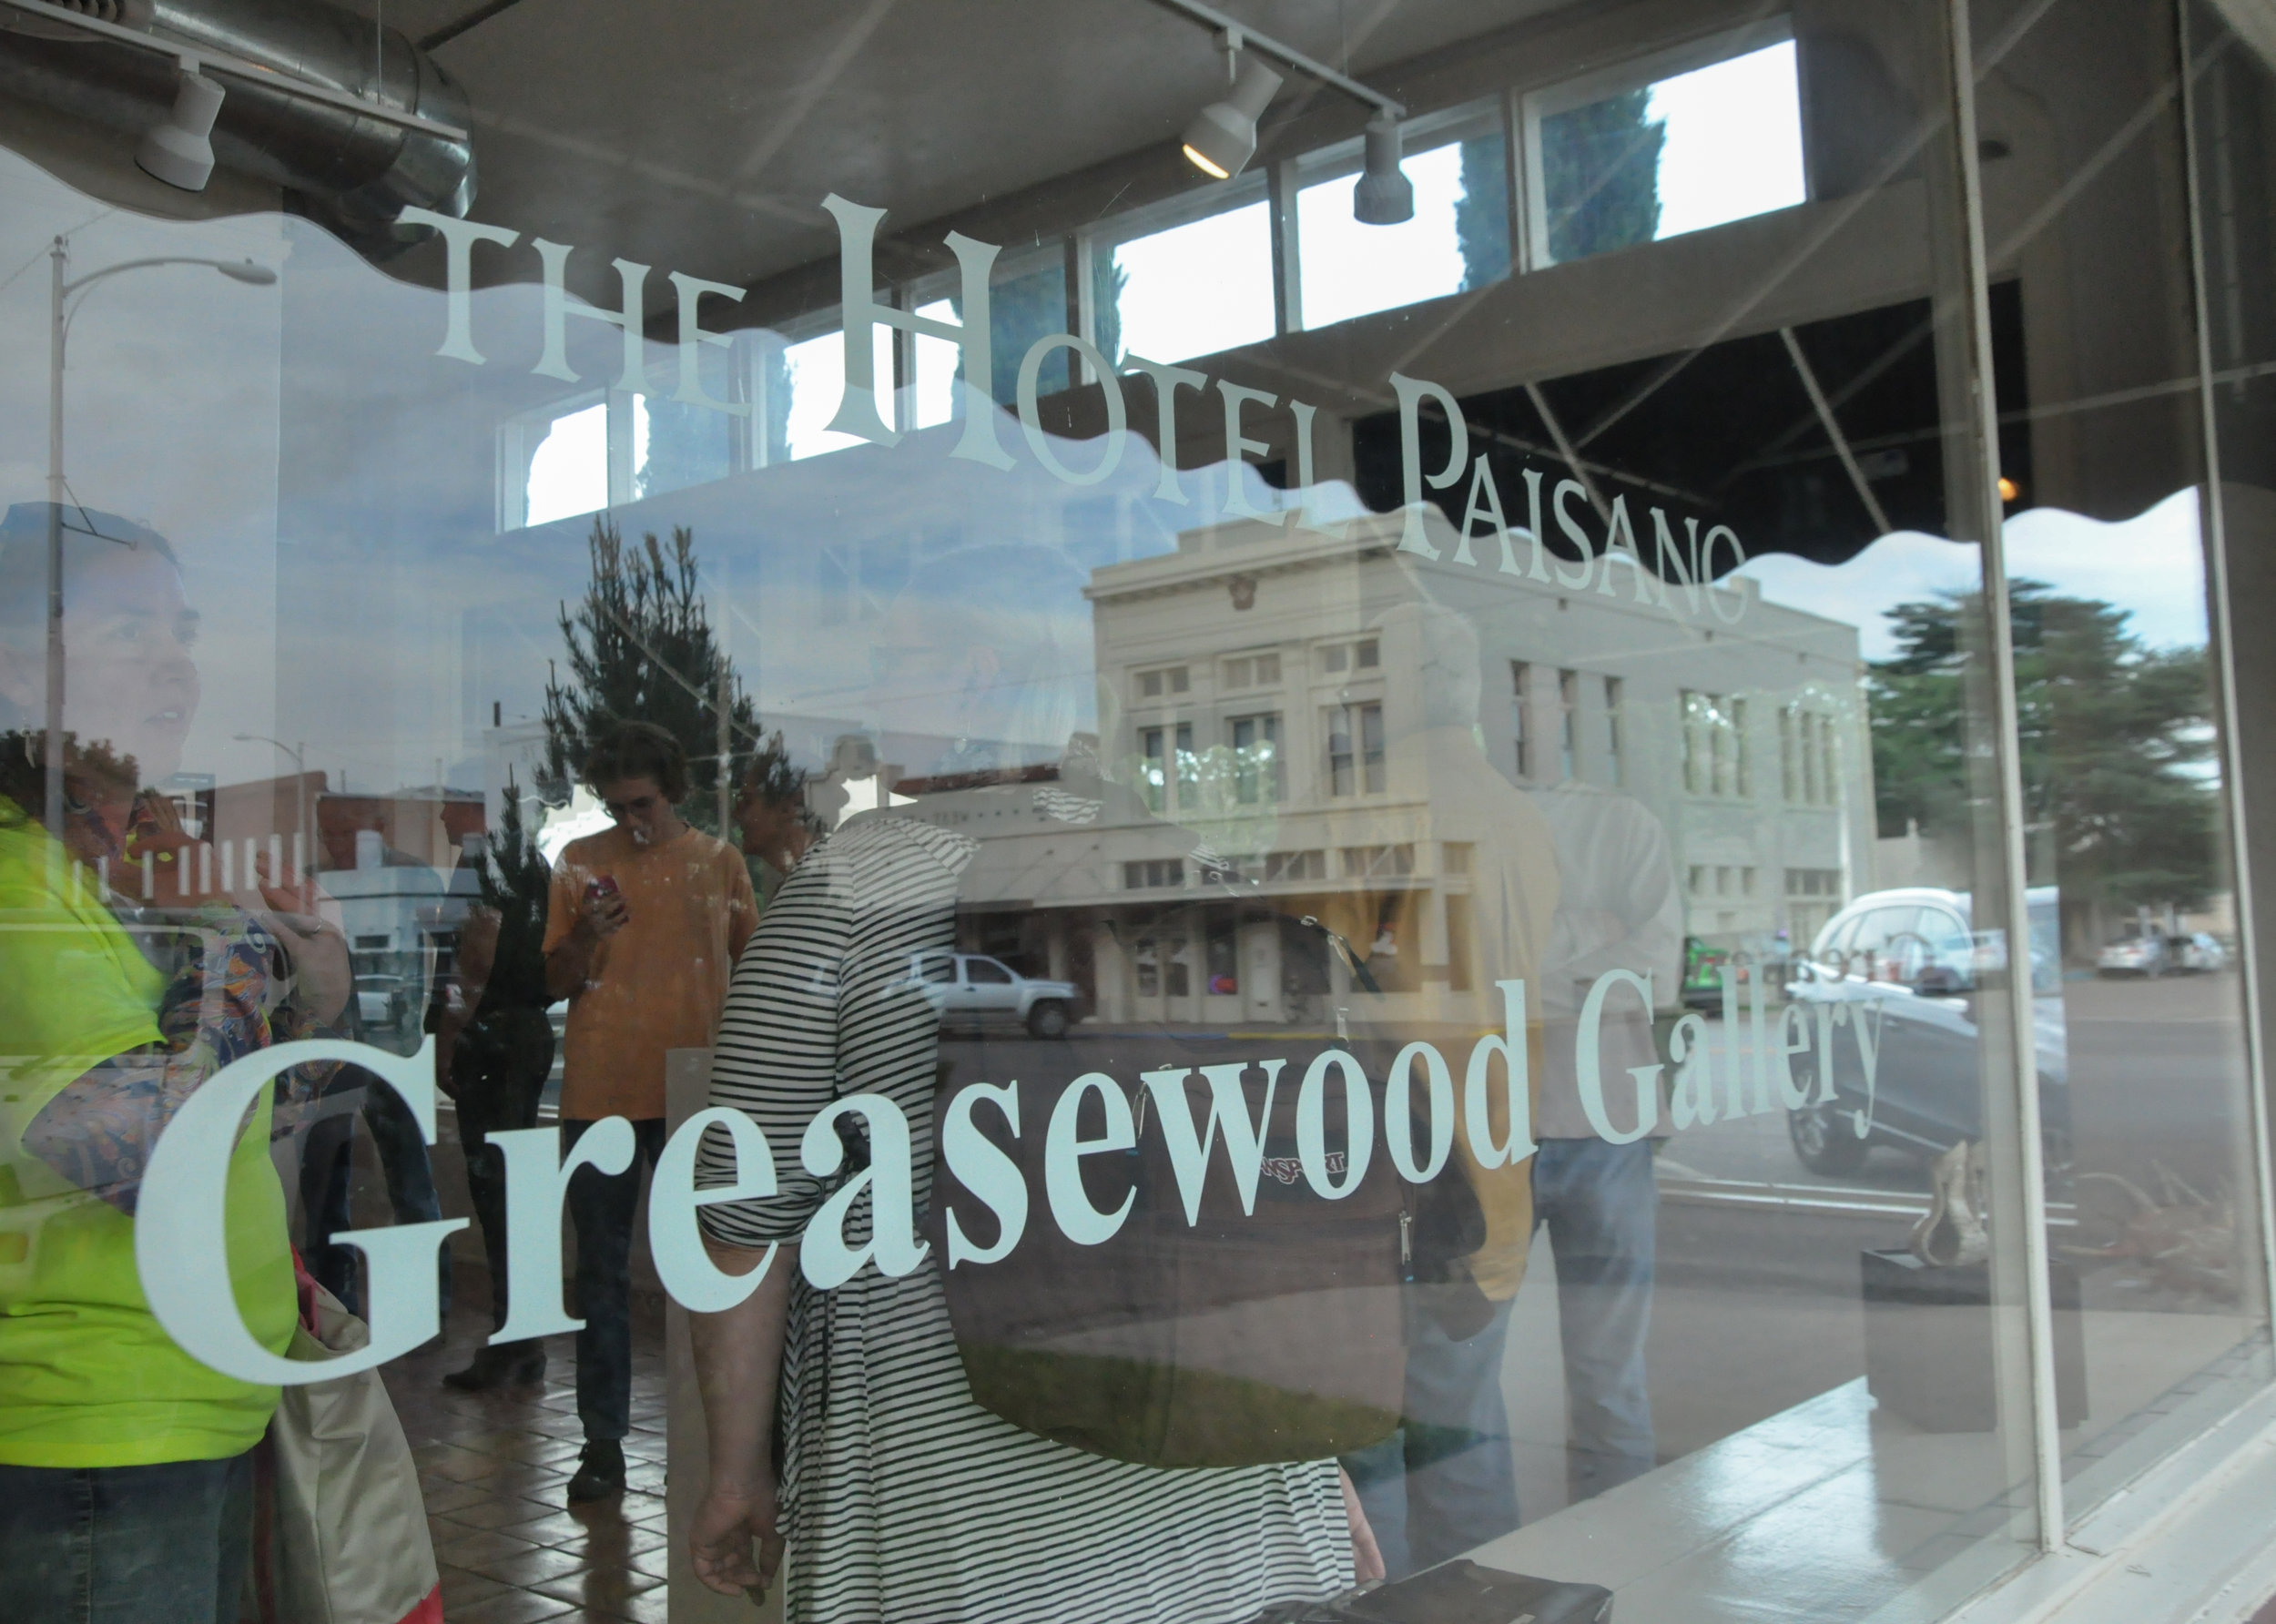 Greasewood Gallery - One Foot Exhibition